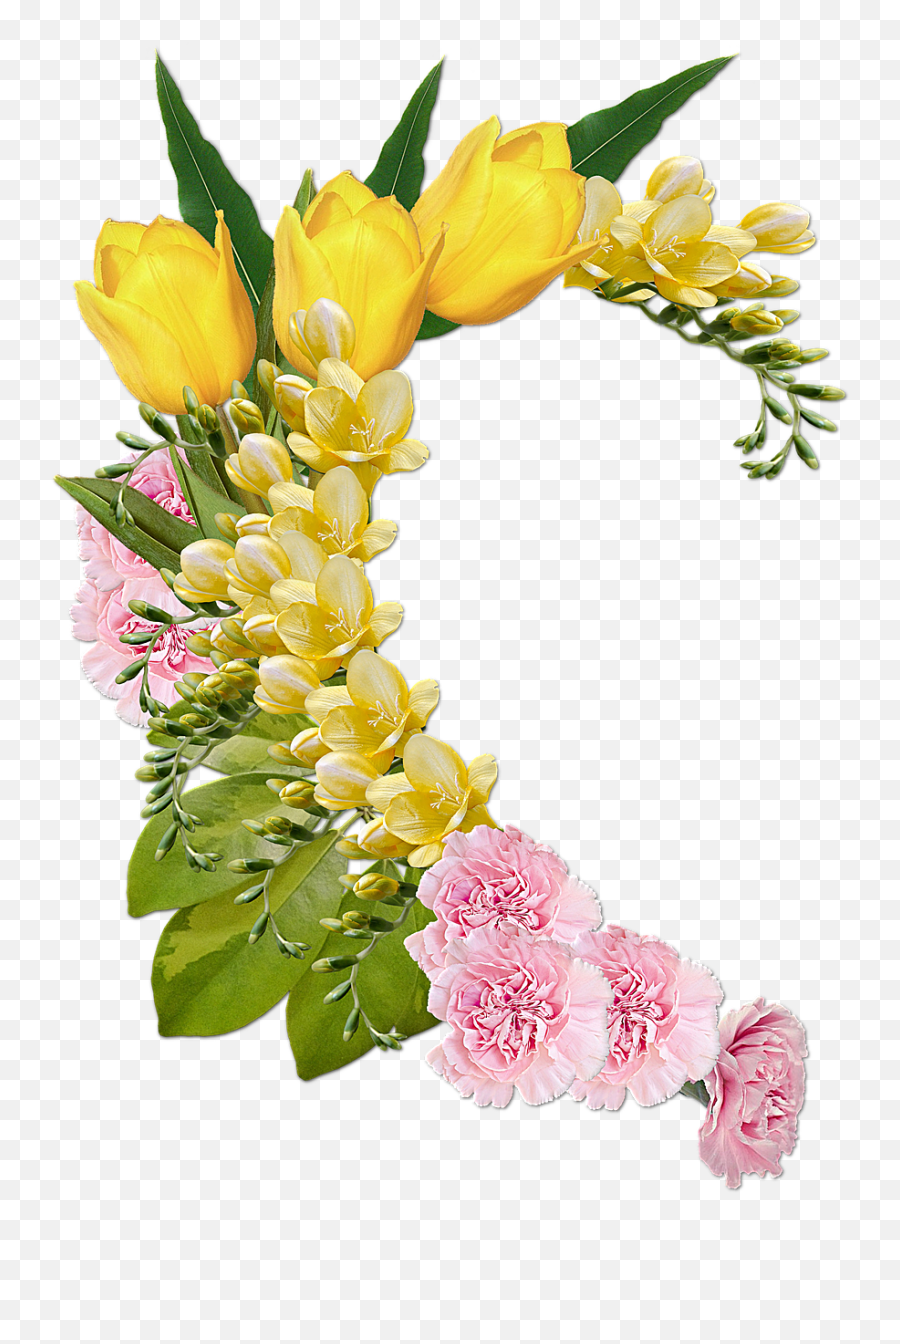 Flower Bouquet Png - Blessed Good Morning 2638598 Vippng Flowers Name In Heart Emoji,Good Morning Emoji